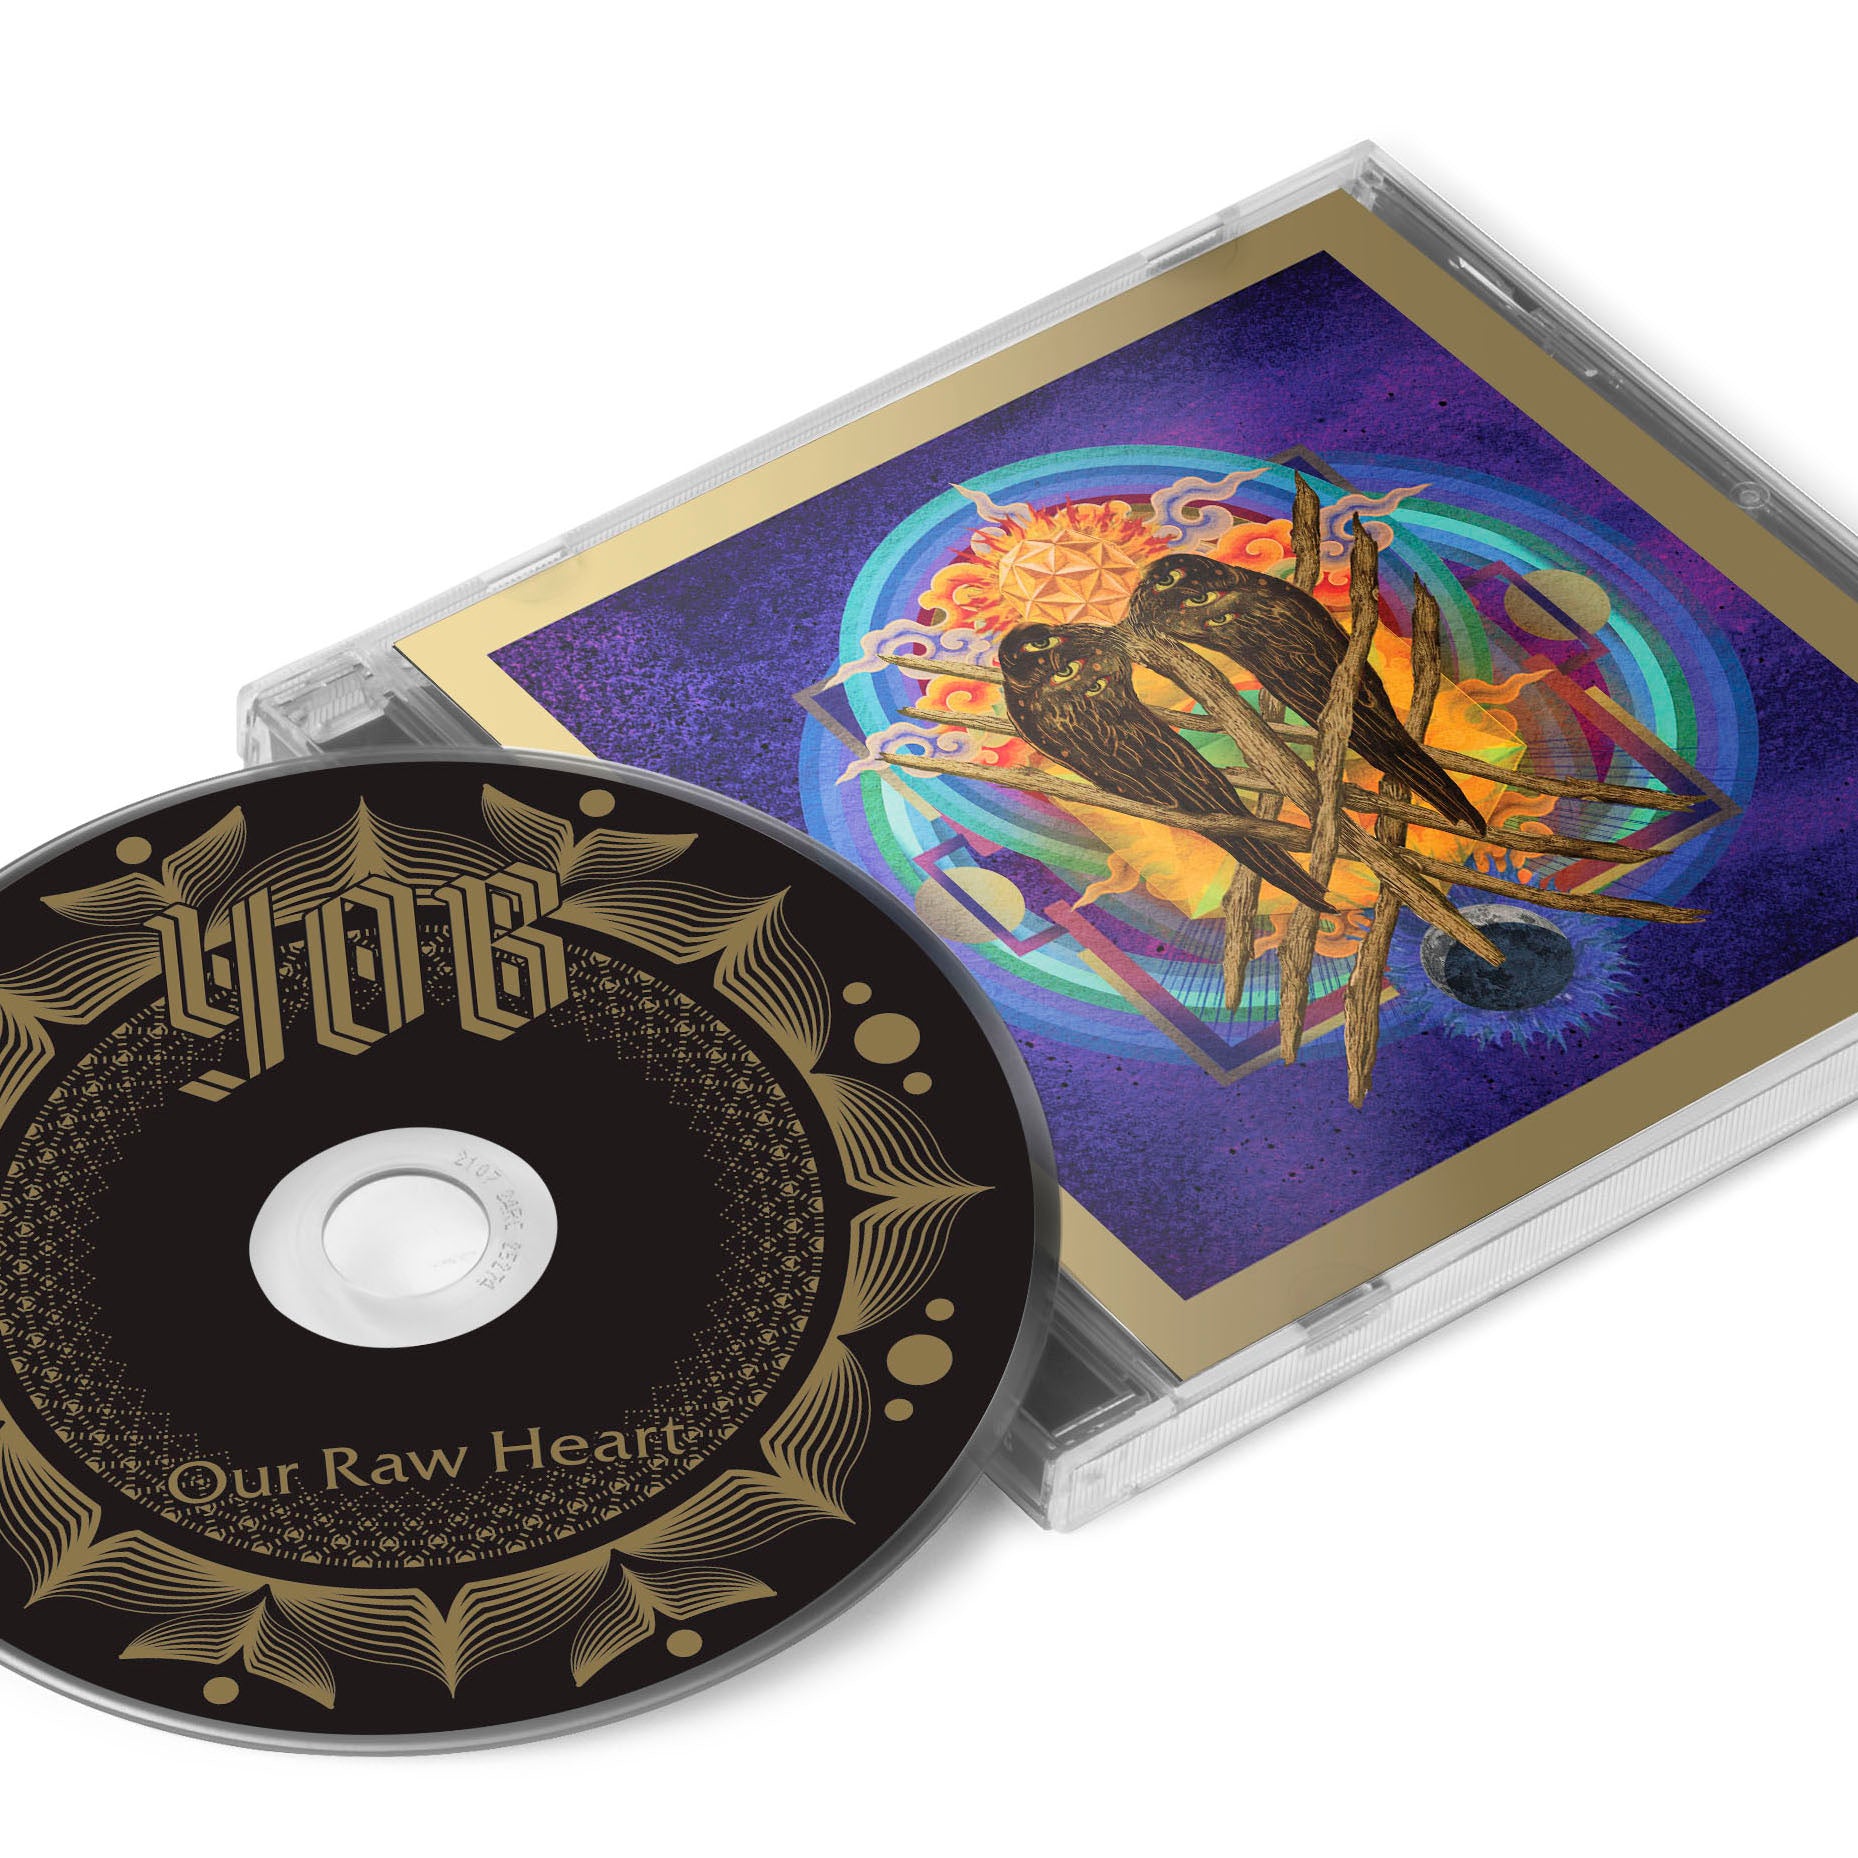 samtale Mindful Borger YOB "Our Raw Heart" CD – Relapse Records Official Store